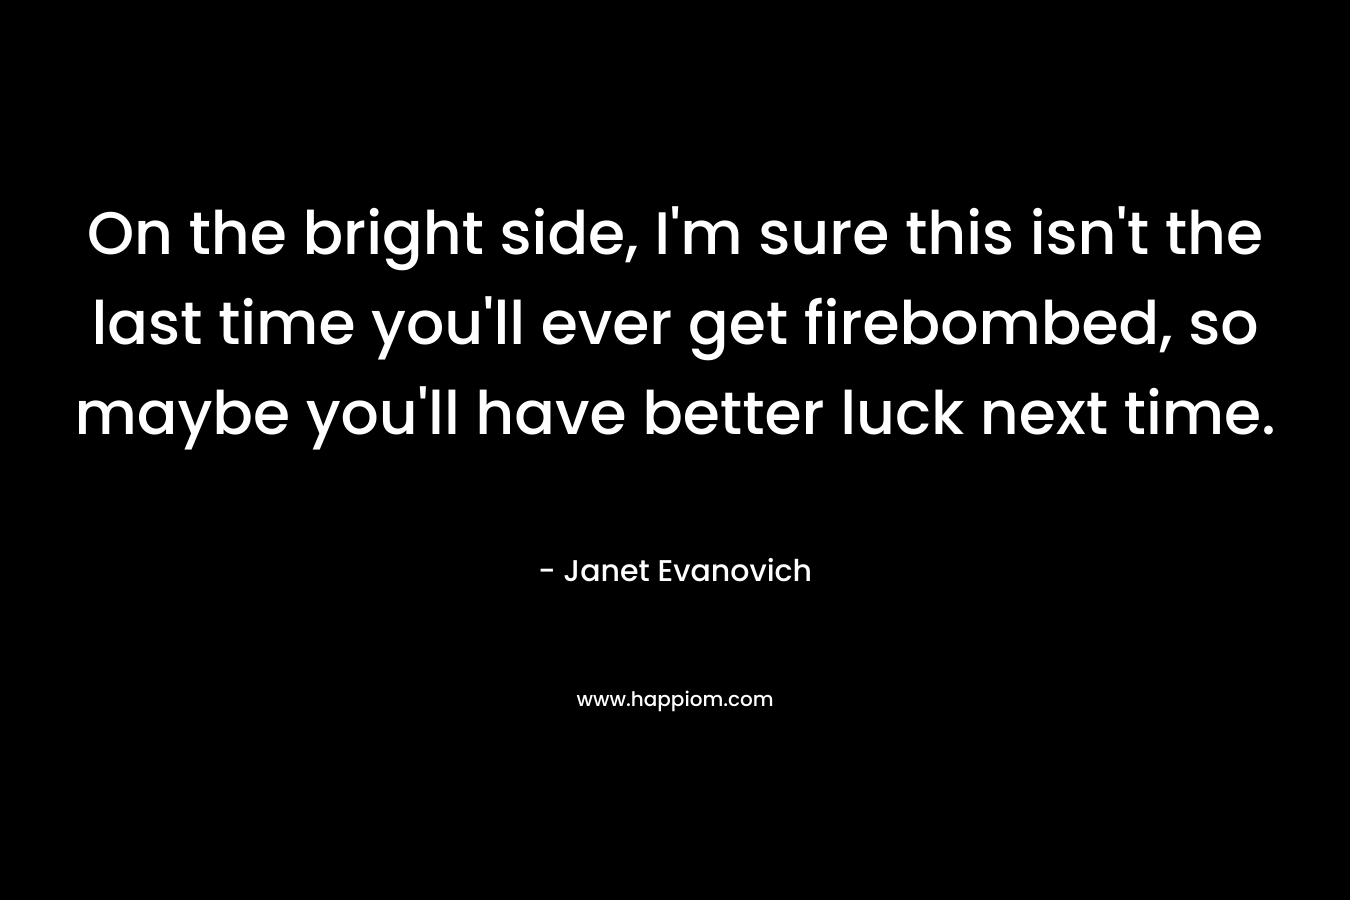 On the bright side, I’m sure this isn’t the last time you’ll ever get firebombed, so maybe you’ll have better luck next time. – Janet Evanovich